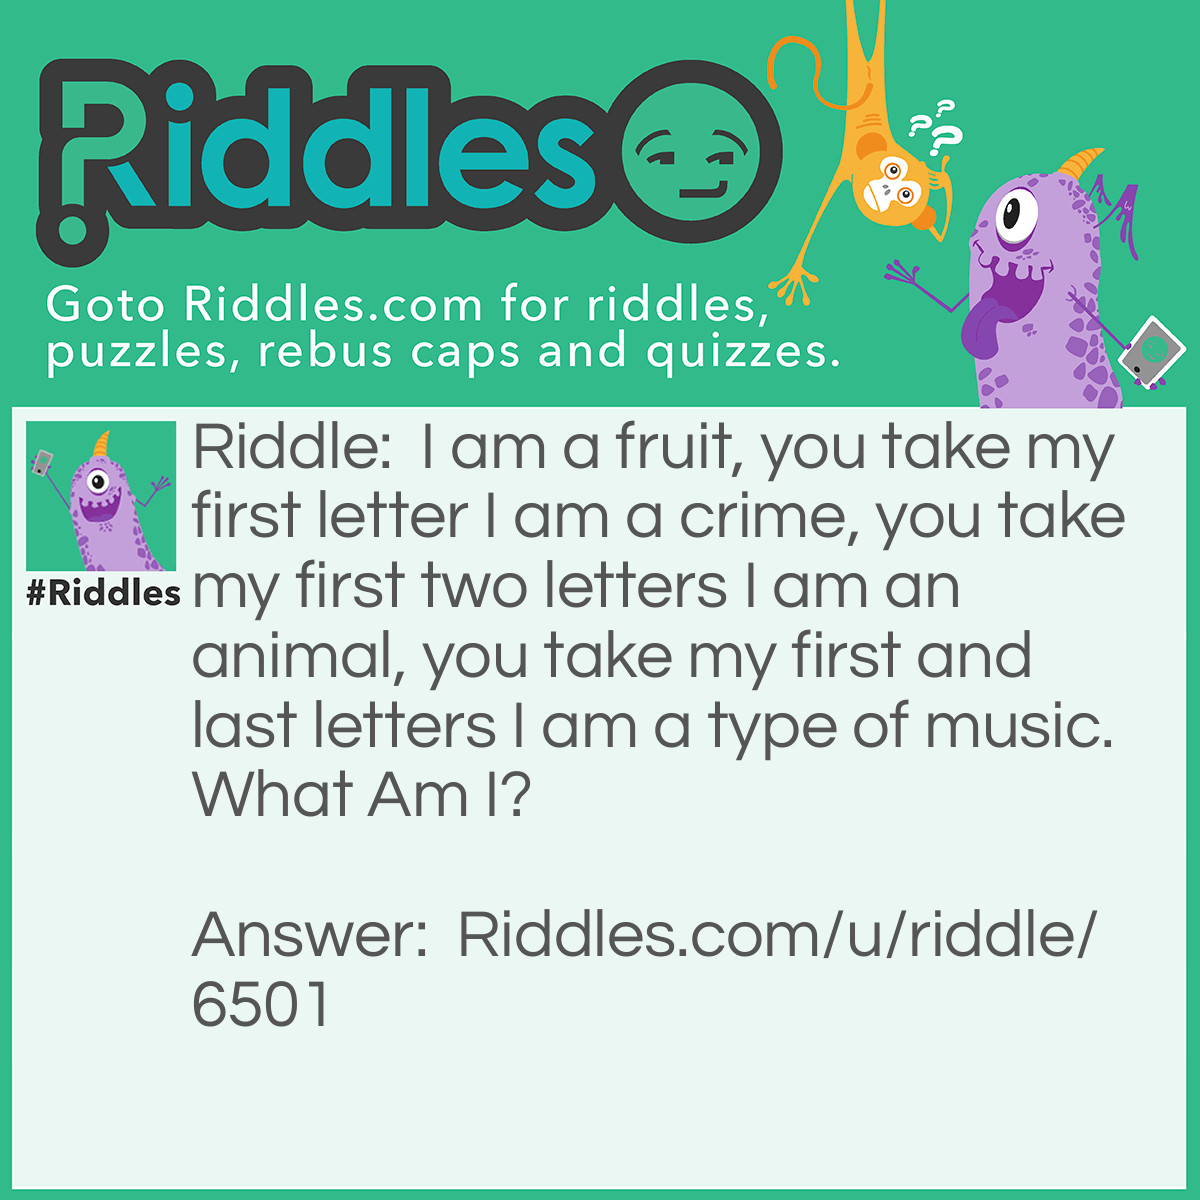 Riddle: I am a fruit, you take my first letter I am a crime, you take my first two letters I am an animal, you take my first and last letters I am a type of music. What Am I? Answer: Grape.